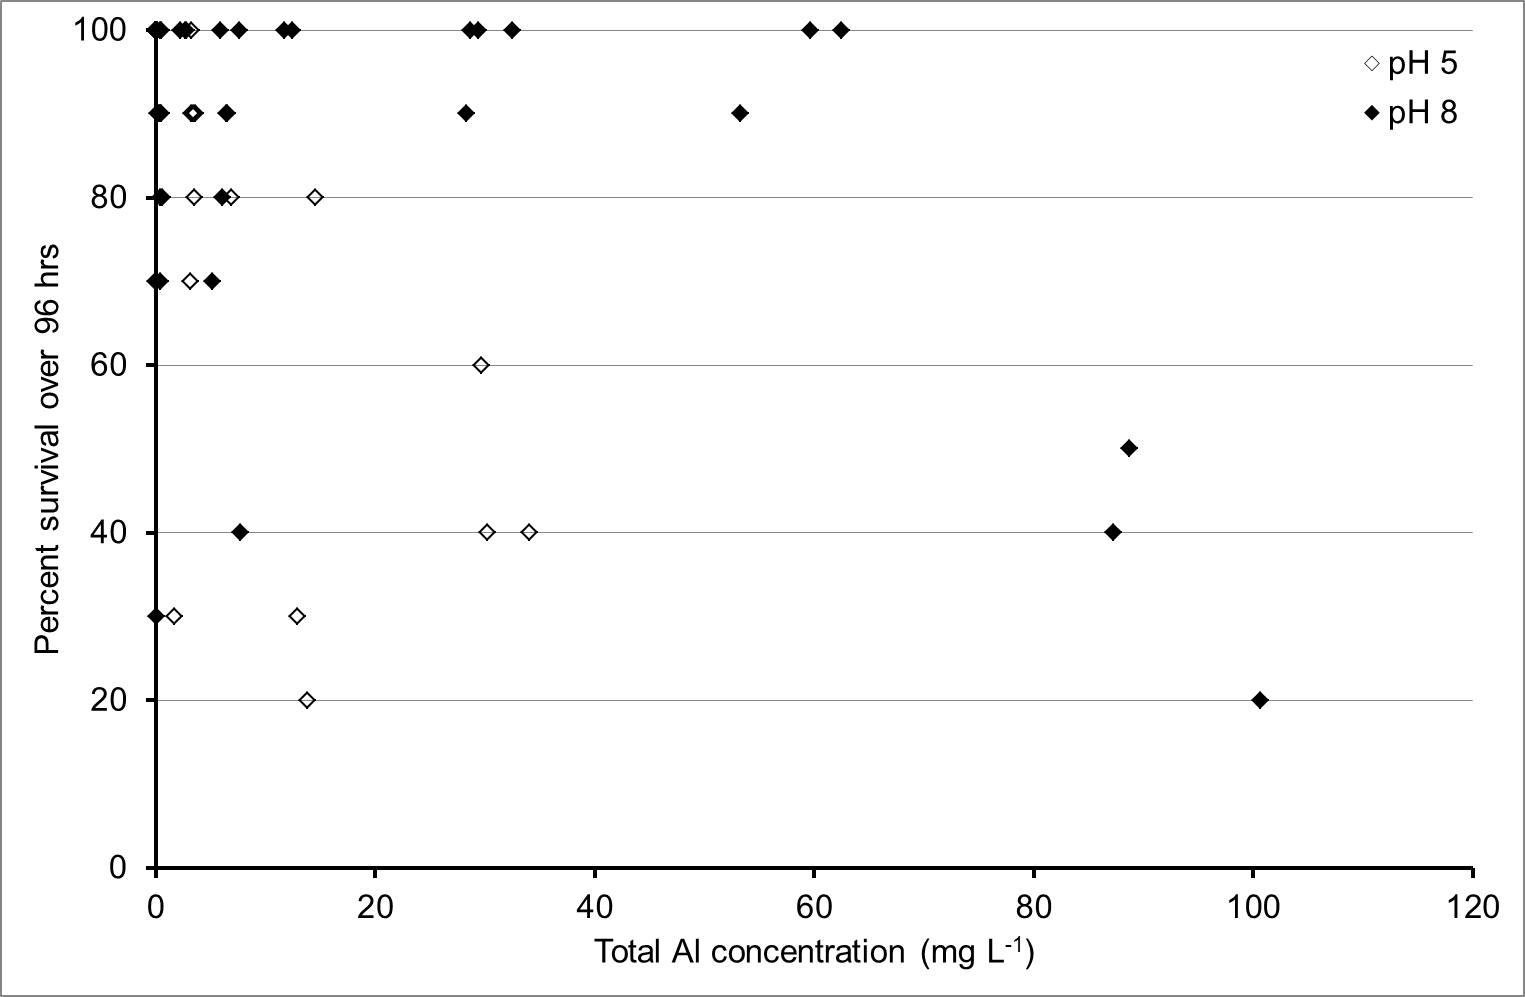 Figure 9. Compilation of results from LC-50 trials at two pH levels (pH 5 and pH 8), shoeing the effect of the concentration of total aluminium on survival of juvenile School Prawn.